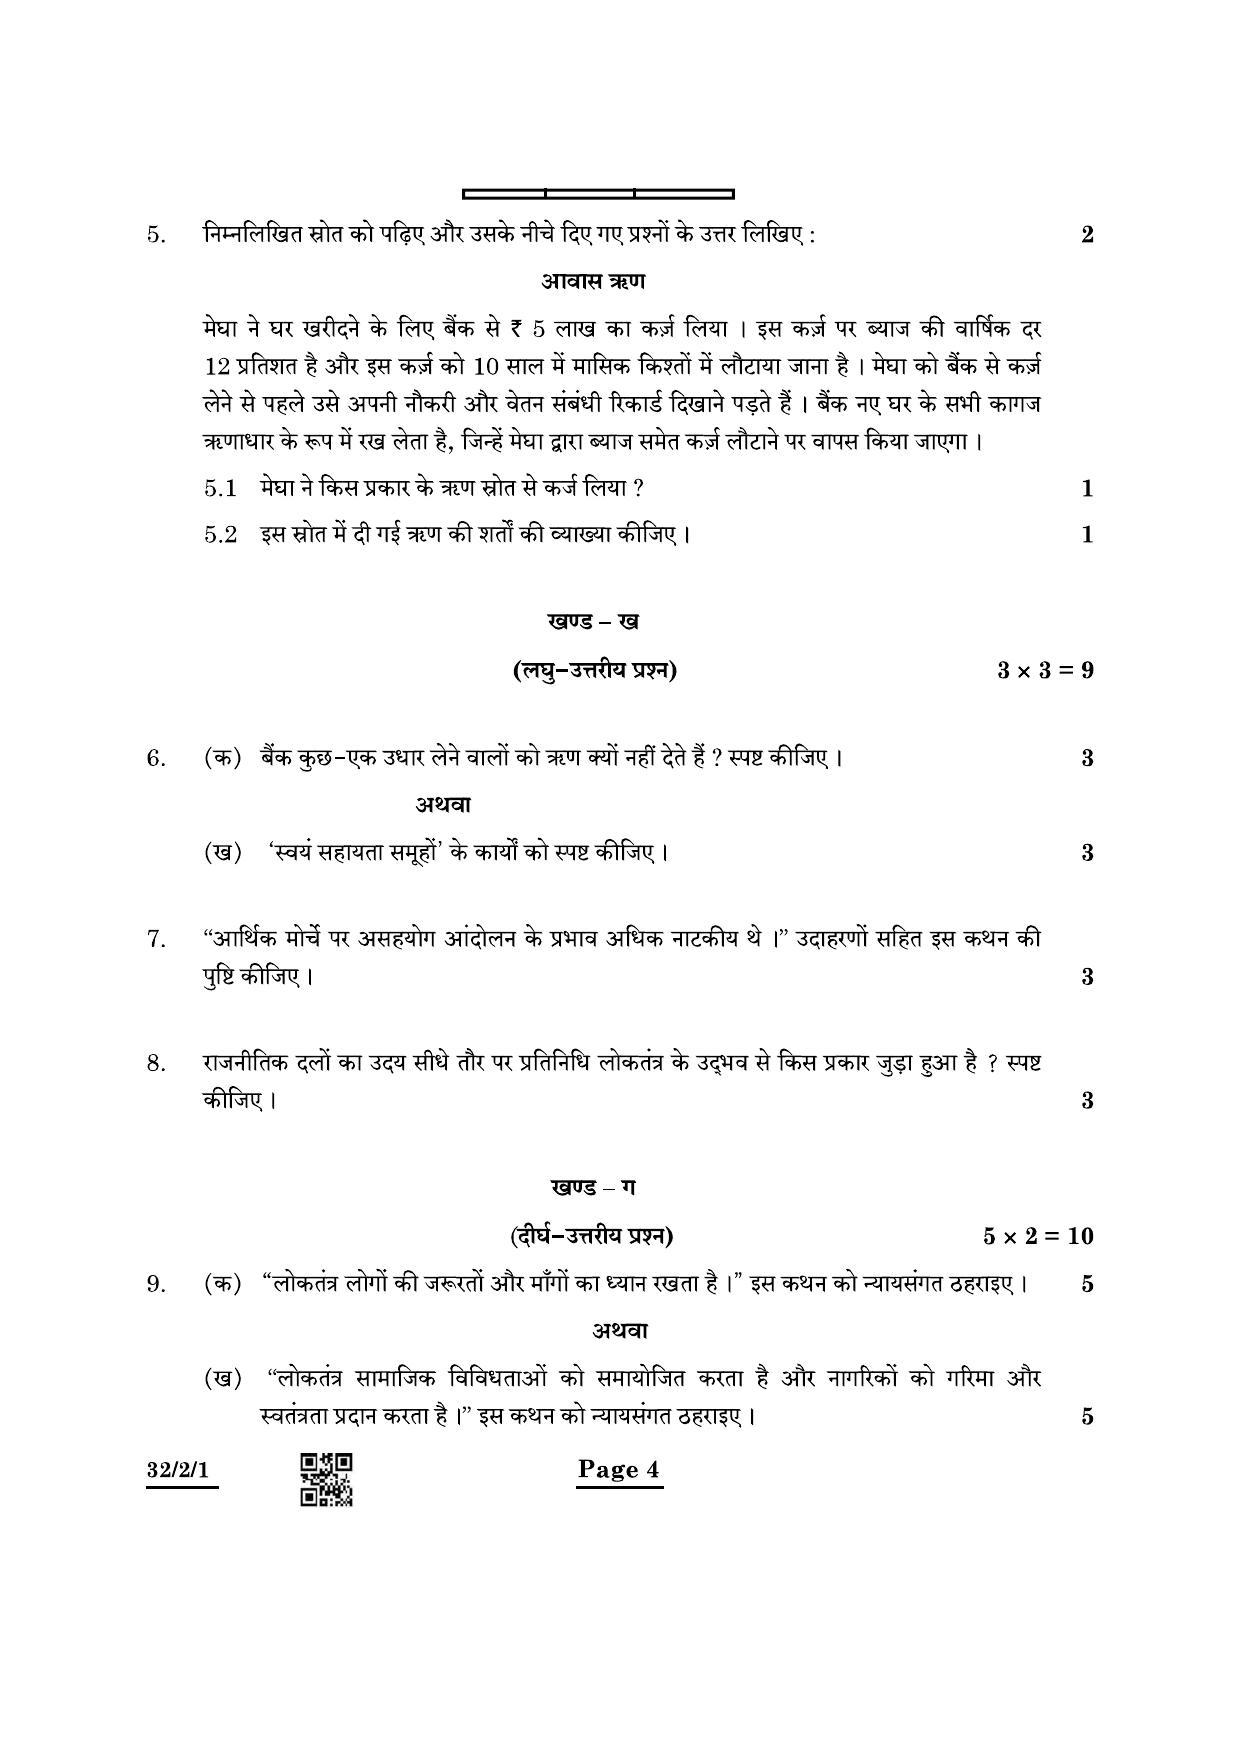 CBSE Class 10 32-2-1 Social Science 2022 Question Paper - Page 4